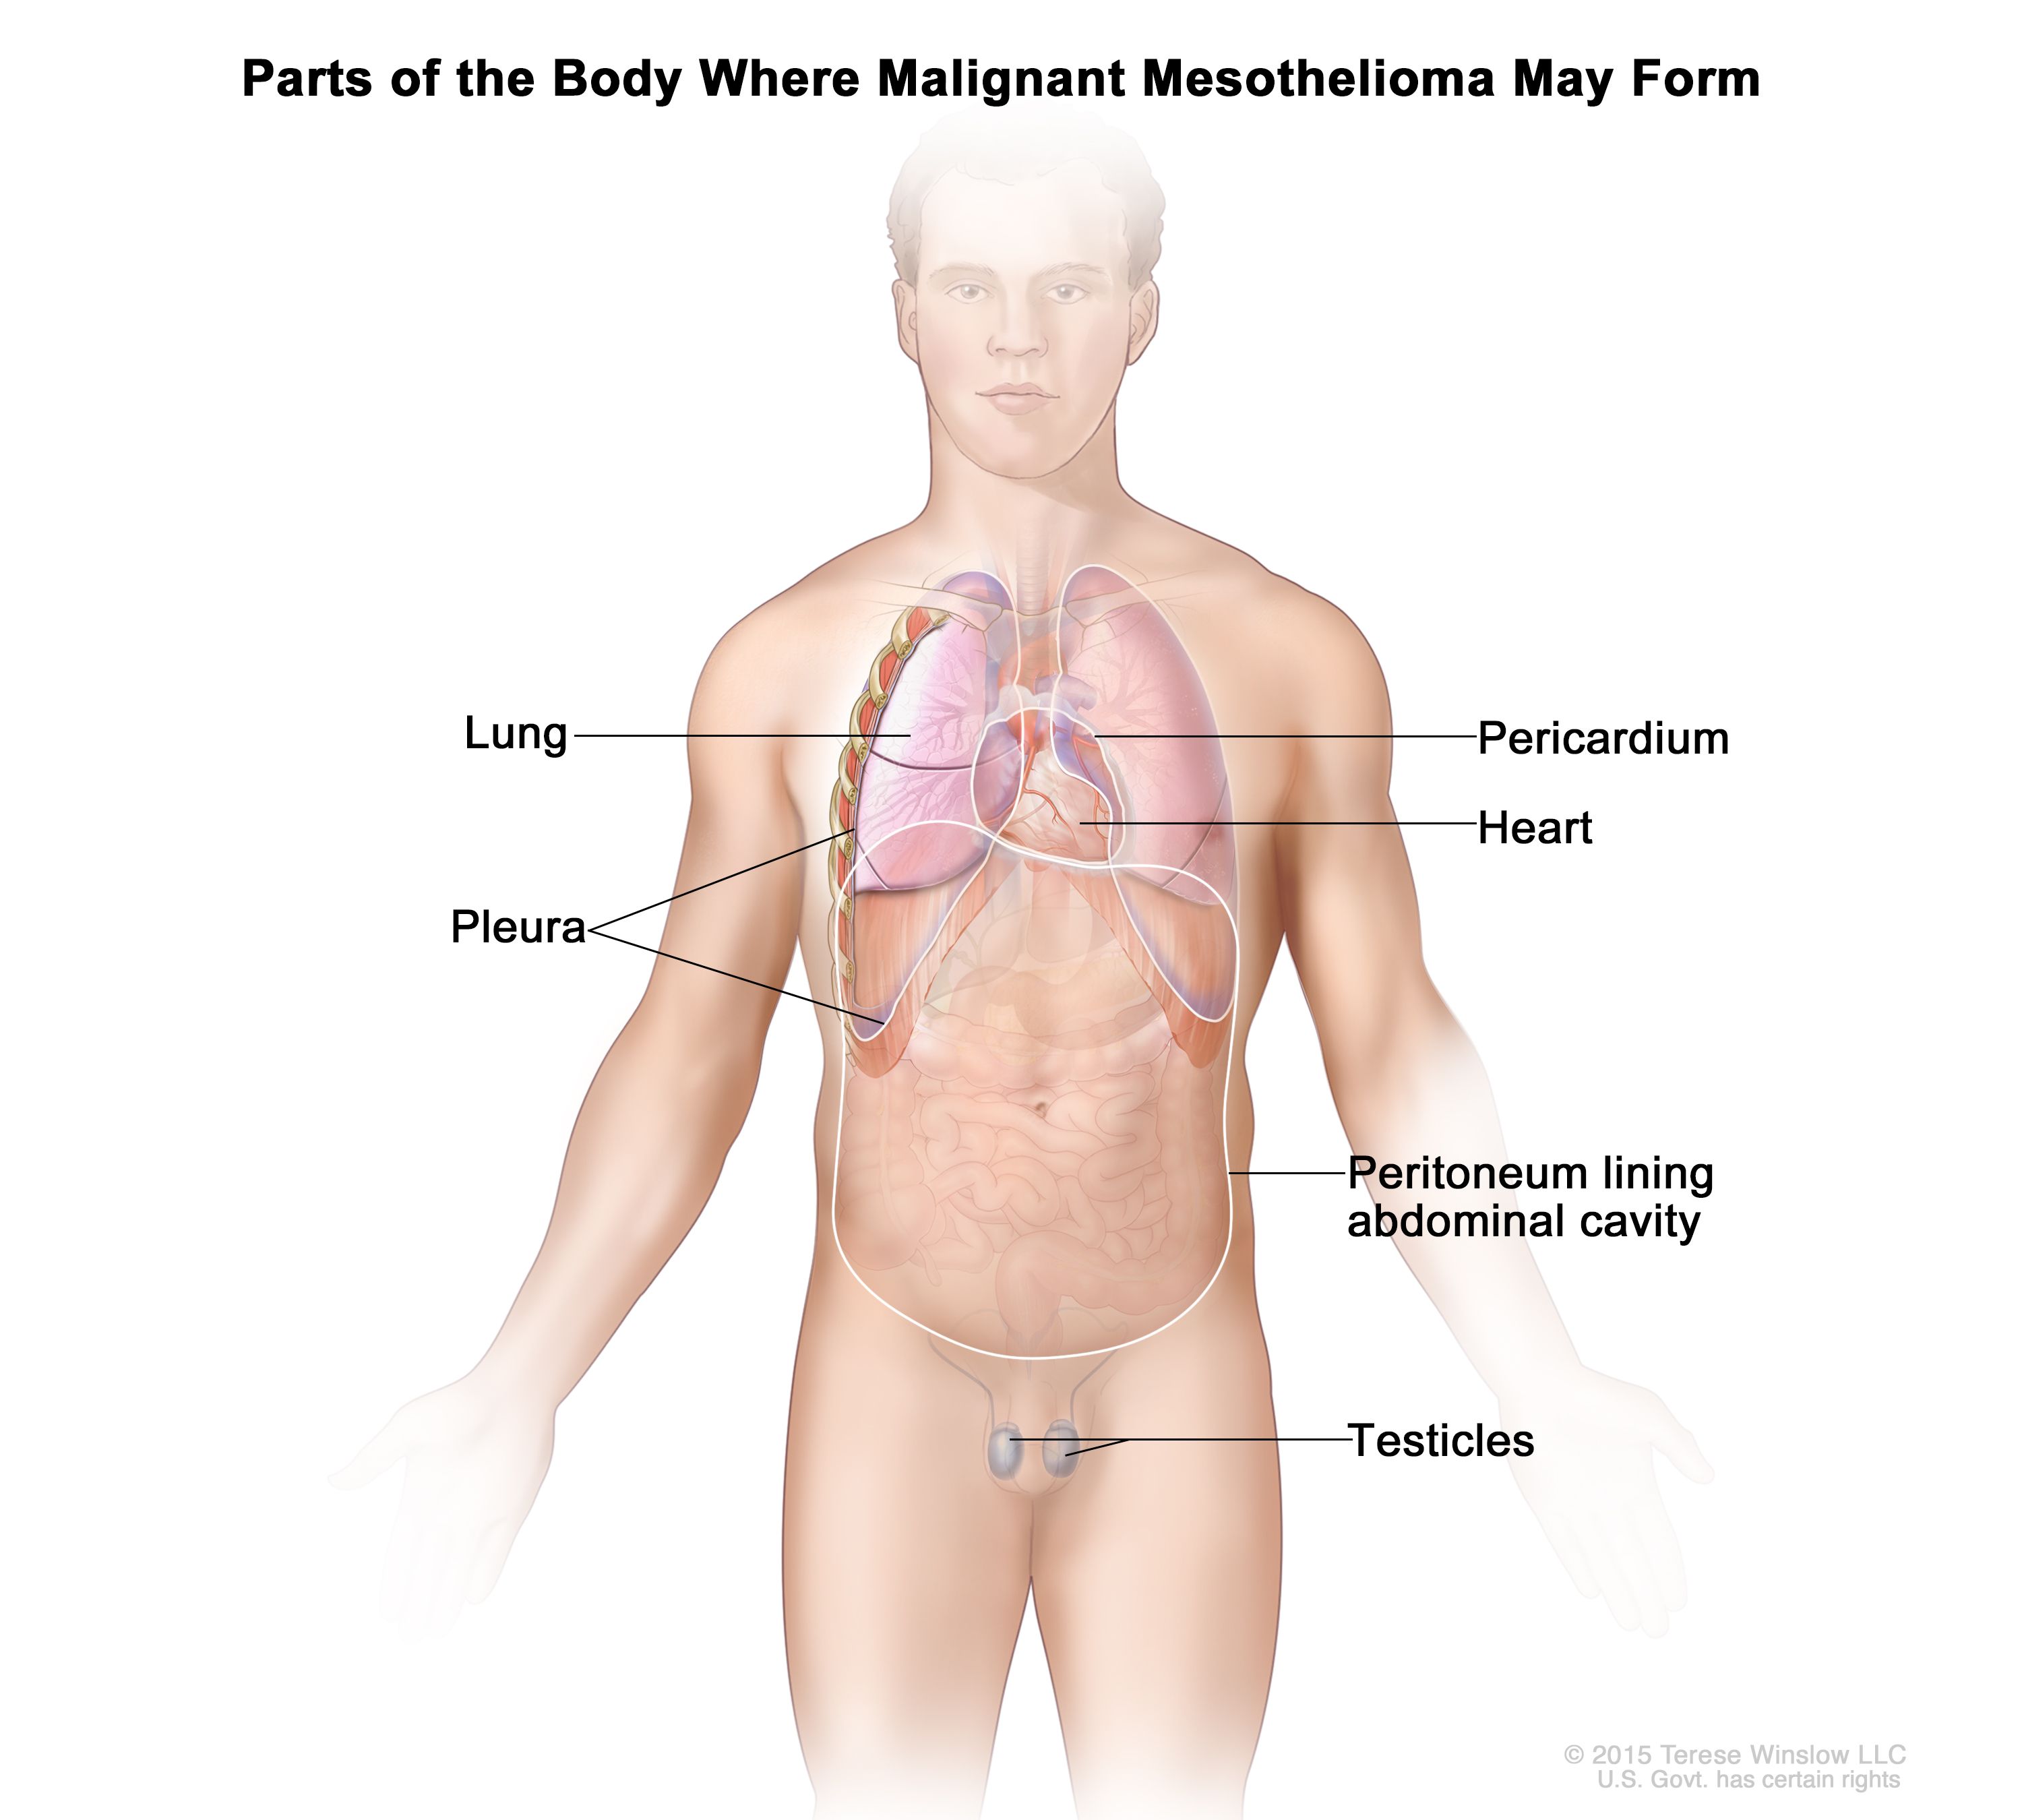 incidence rate of malignant mesothelioma